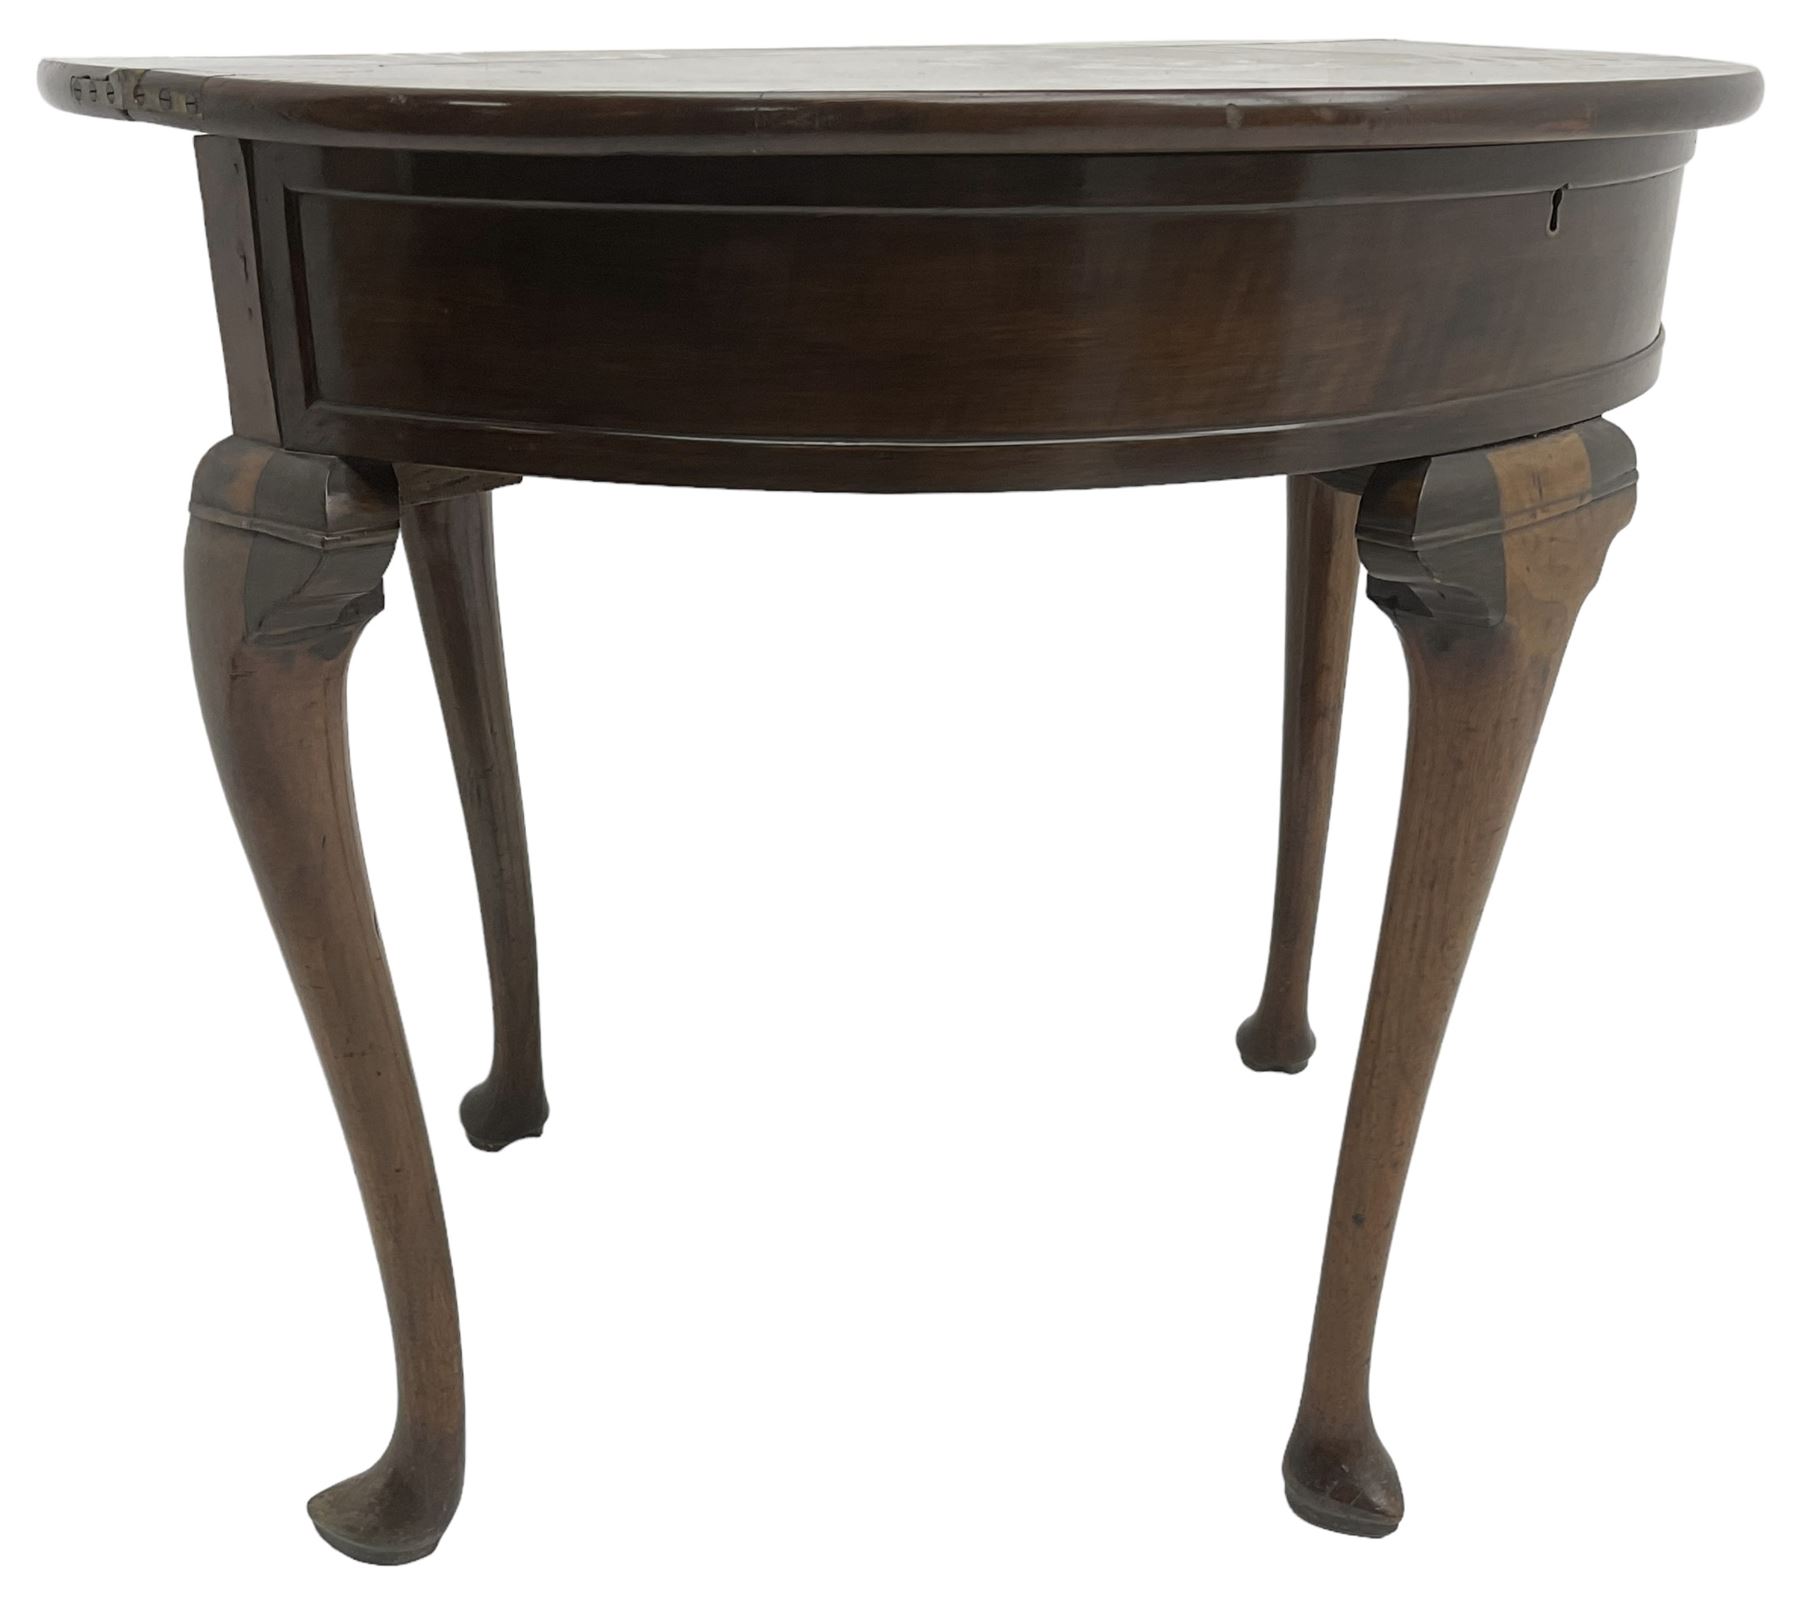 19th century walnut demi-lune side table - Image 3 of 6